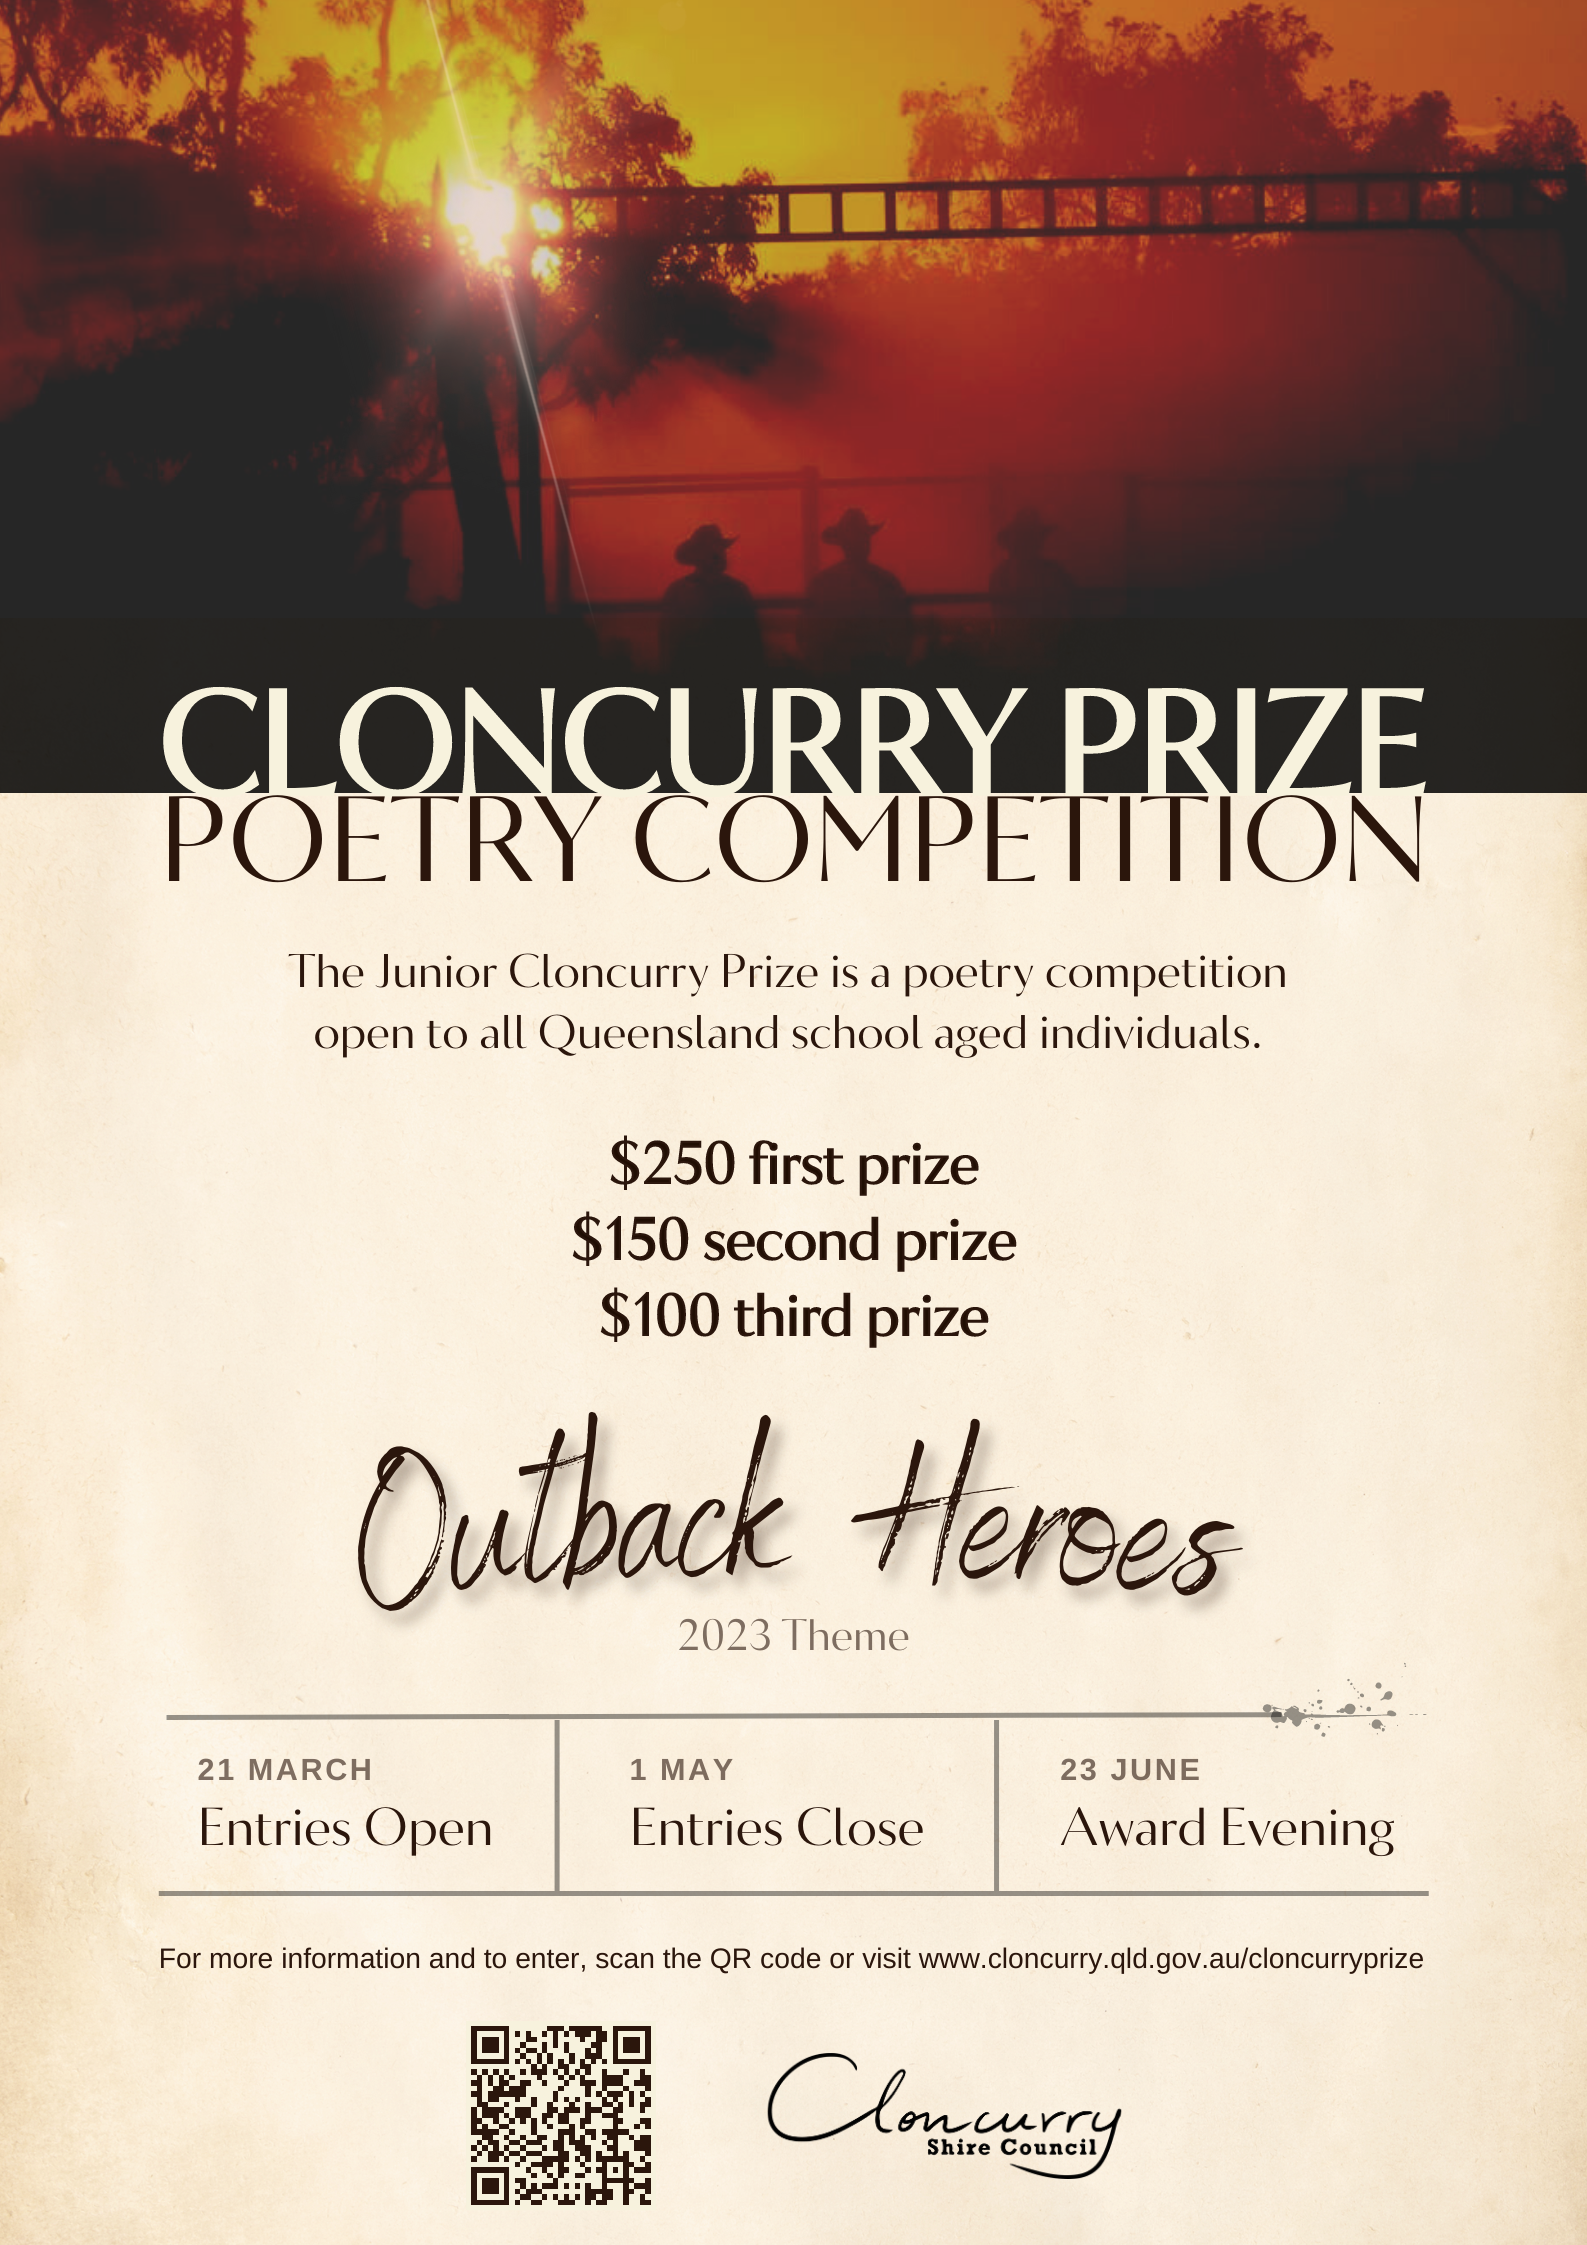 Cloncurry Prize Poetry Competition